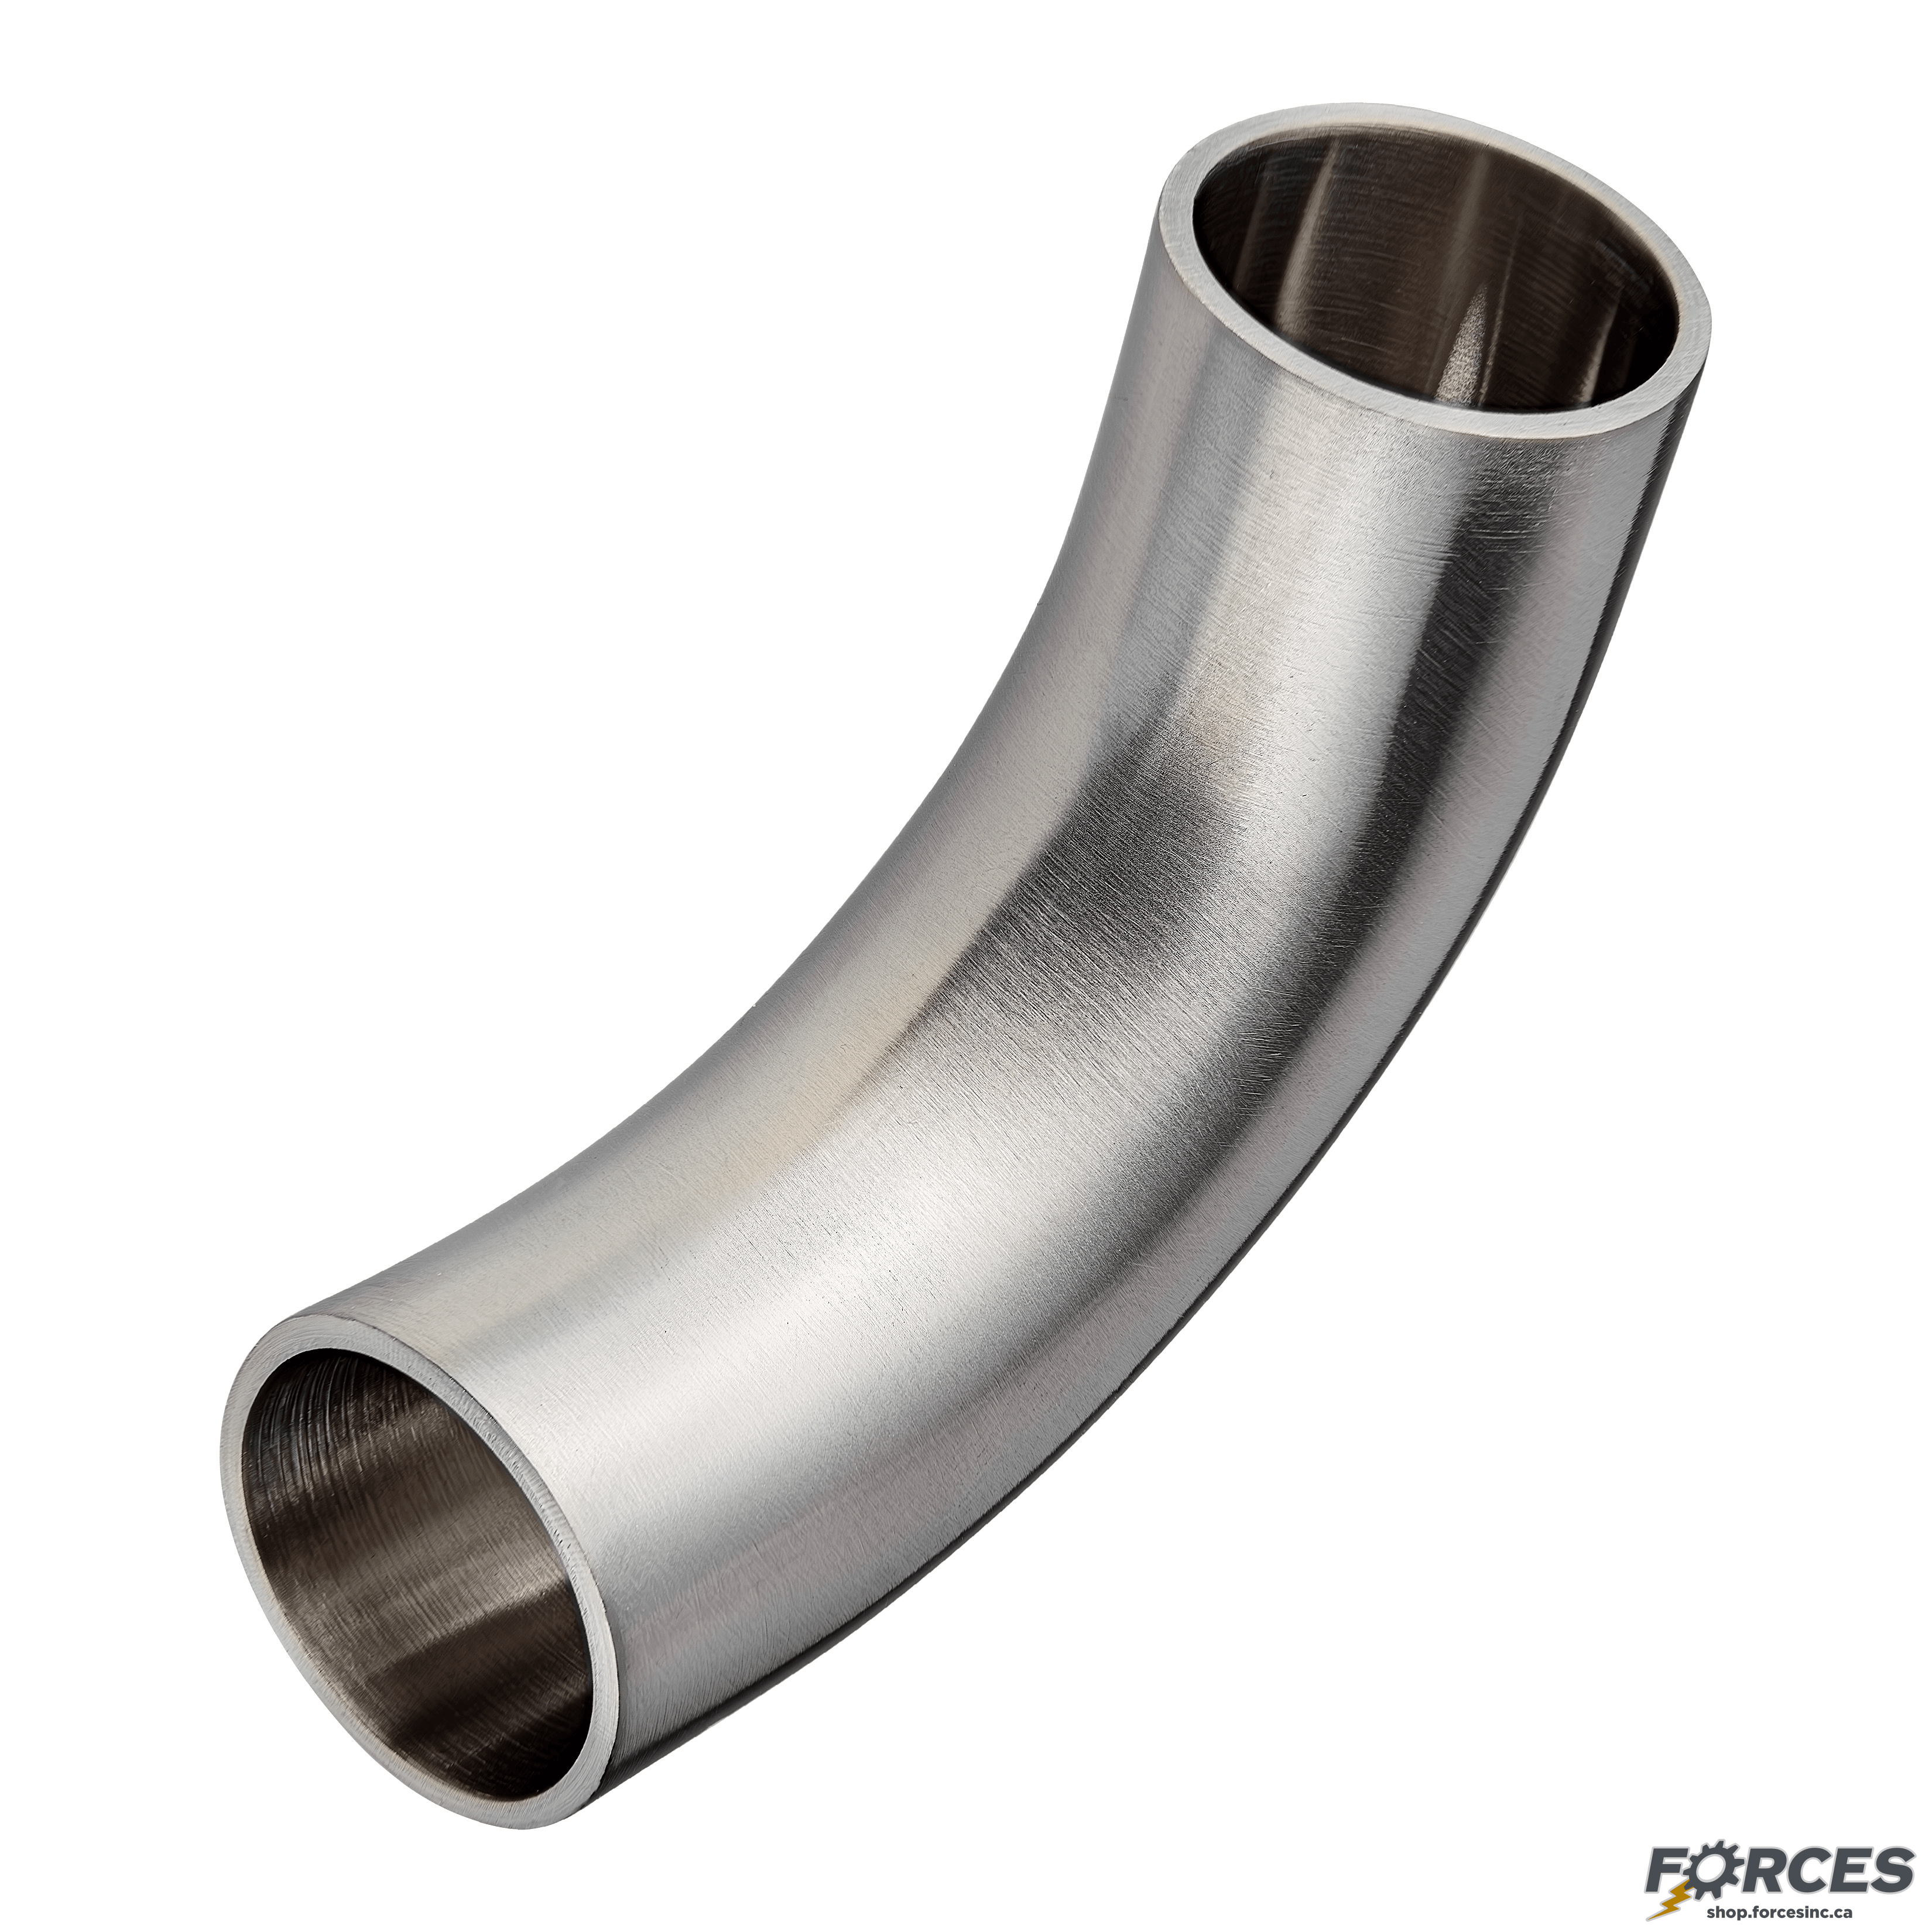 2" Butt Weld 90° Elbow Long Tangent - Stainless Steel 304 - Forces Inc